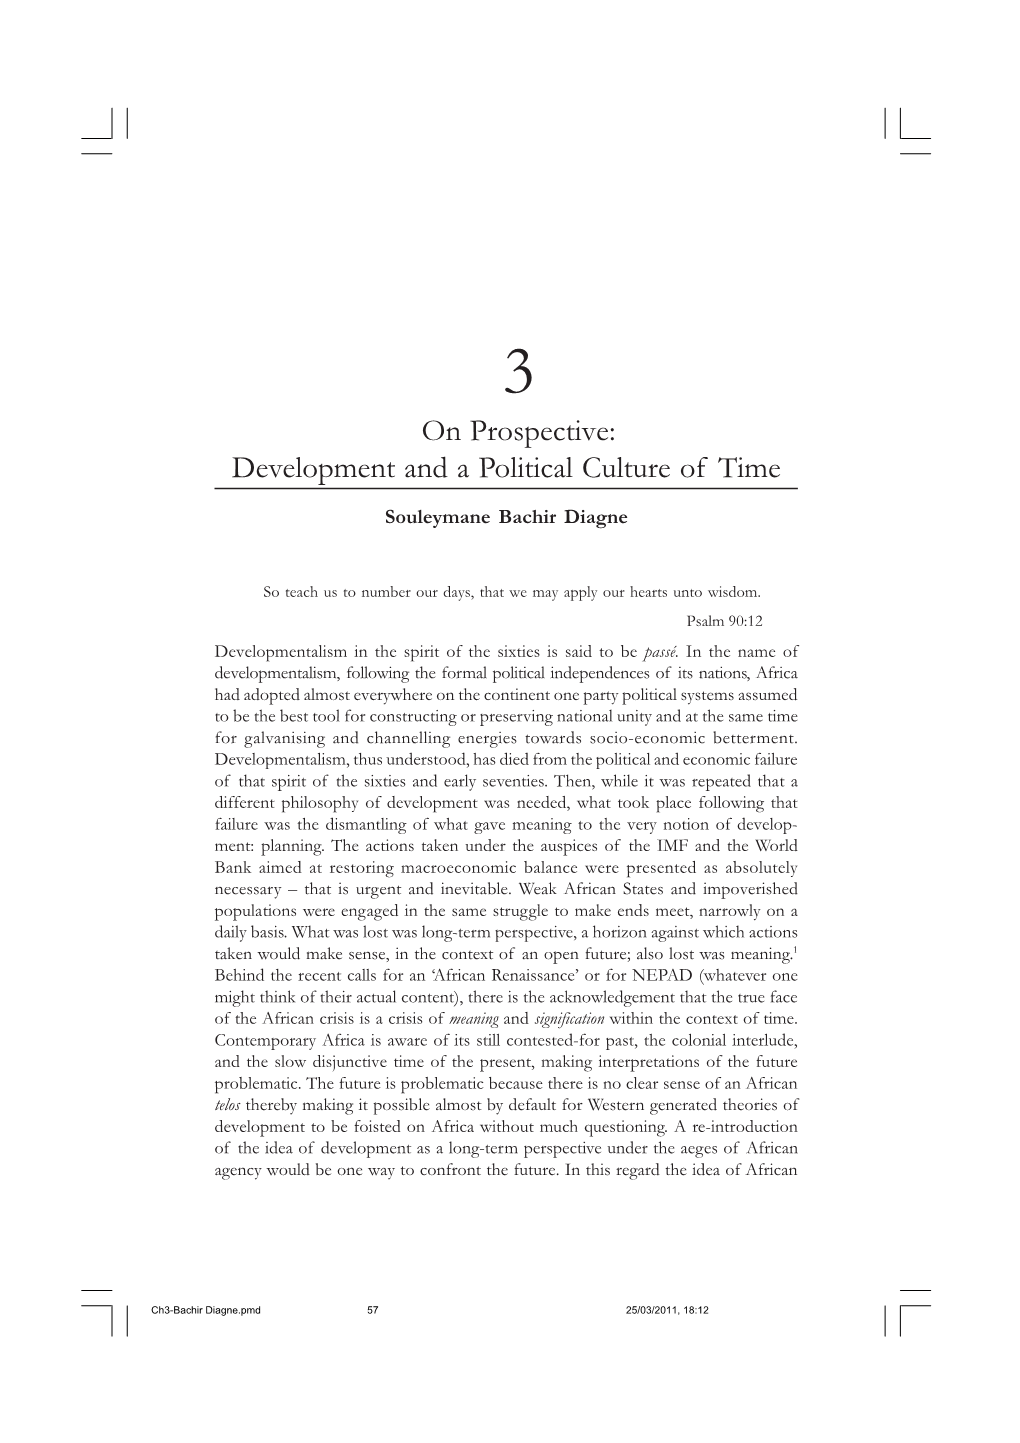 On Prospective: Development and a Political Culture of Time